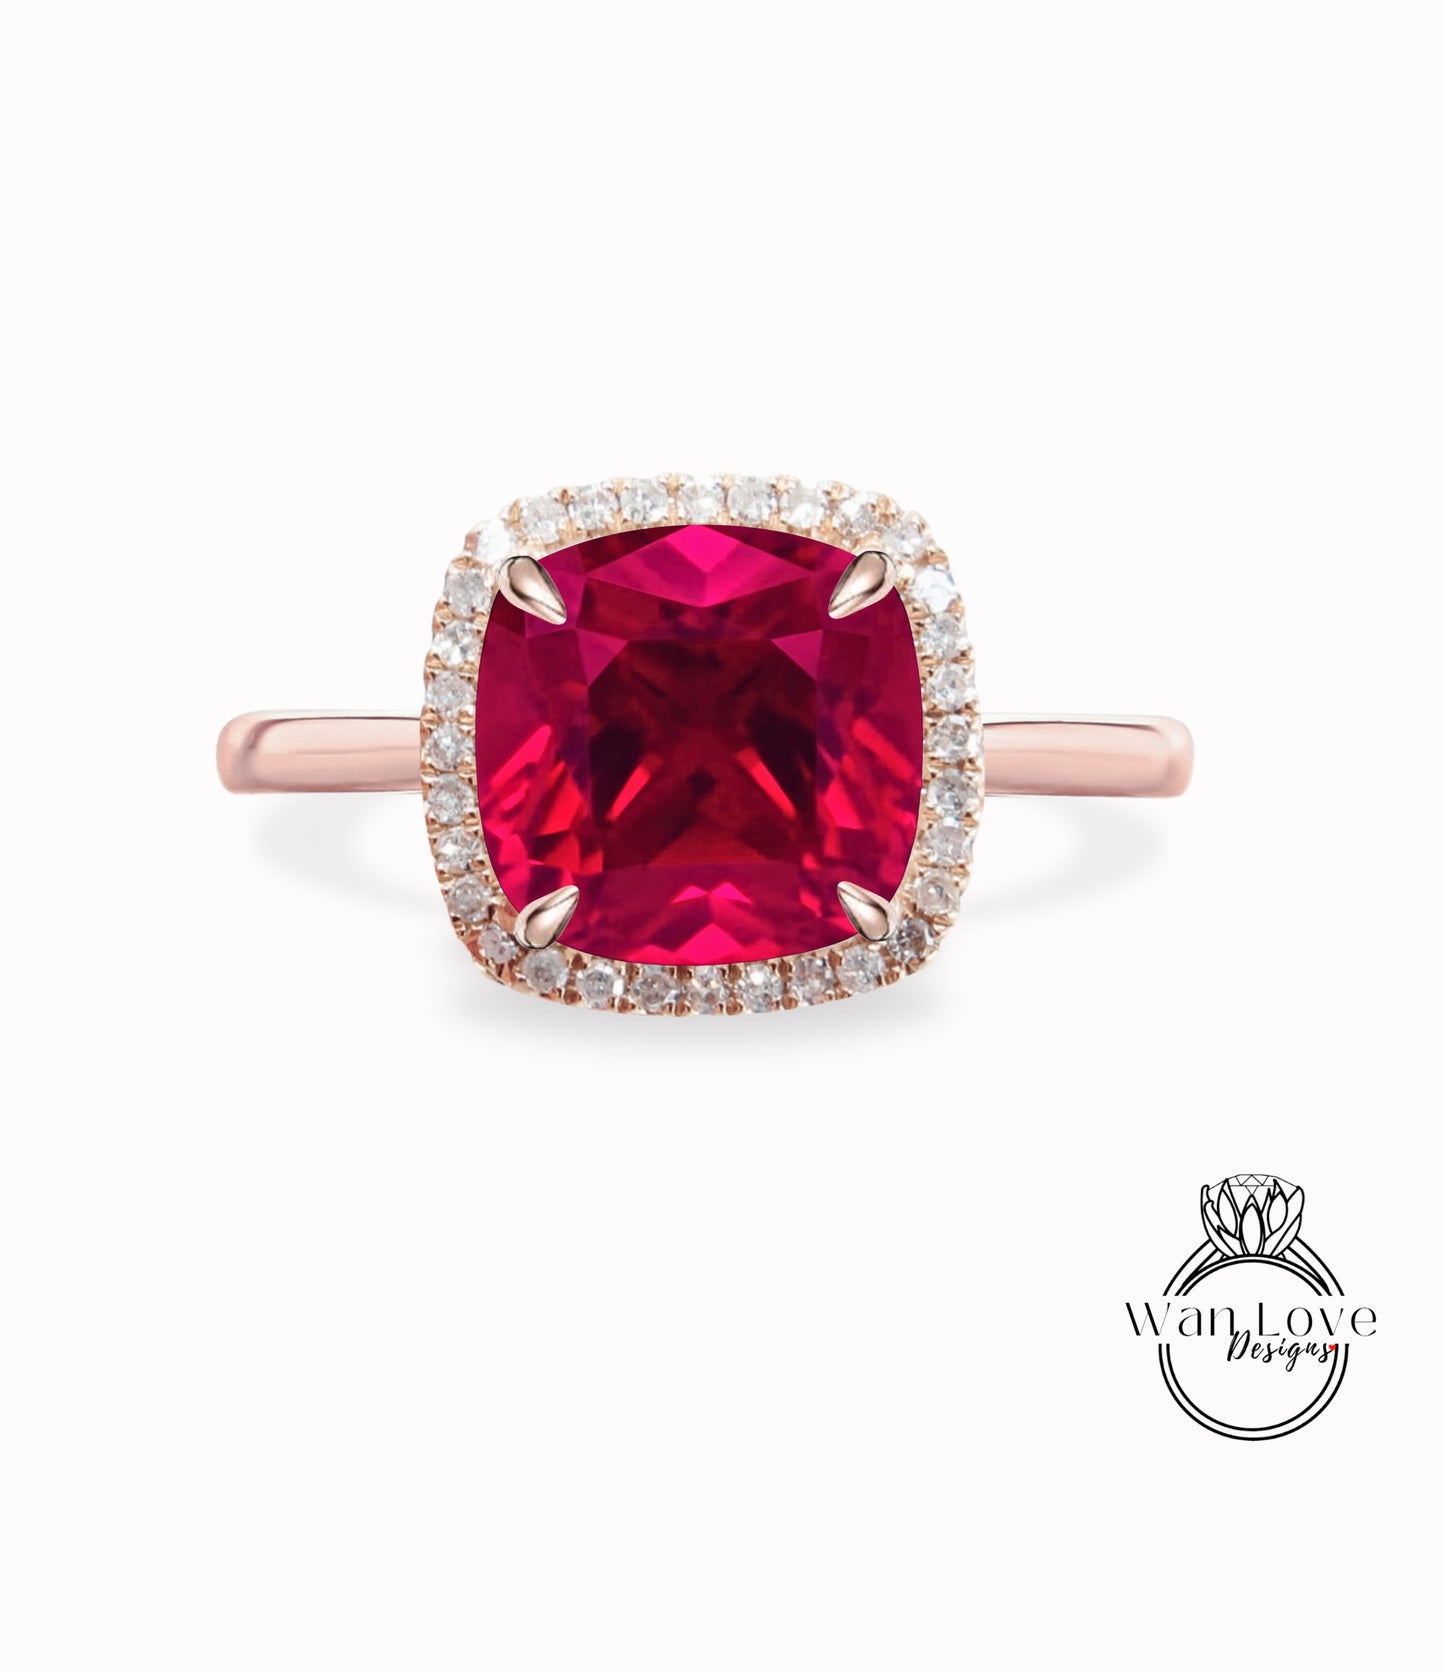 Cushion cut Ruby engagement ring rose gold halo ring diamond halo tapered plain thin dainty band art deco anniversary promise ring